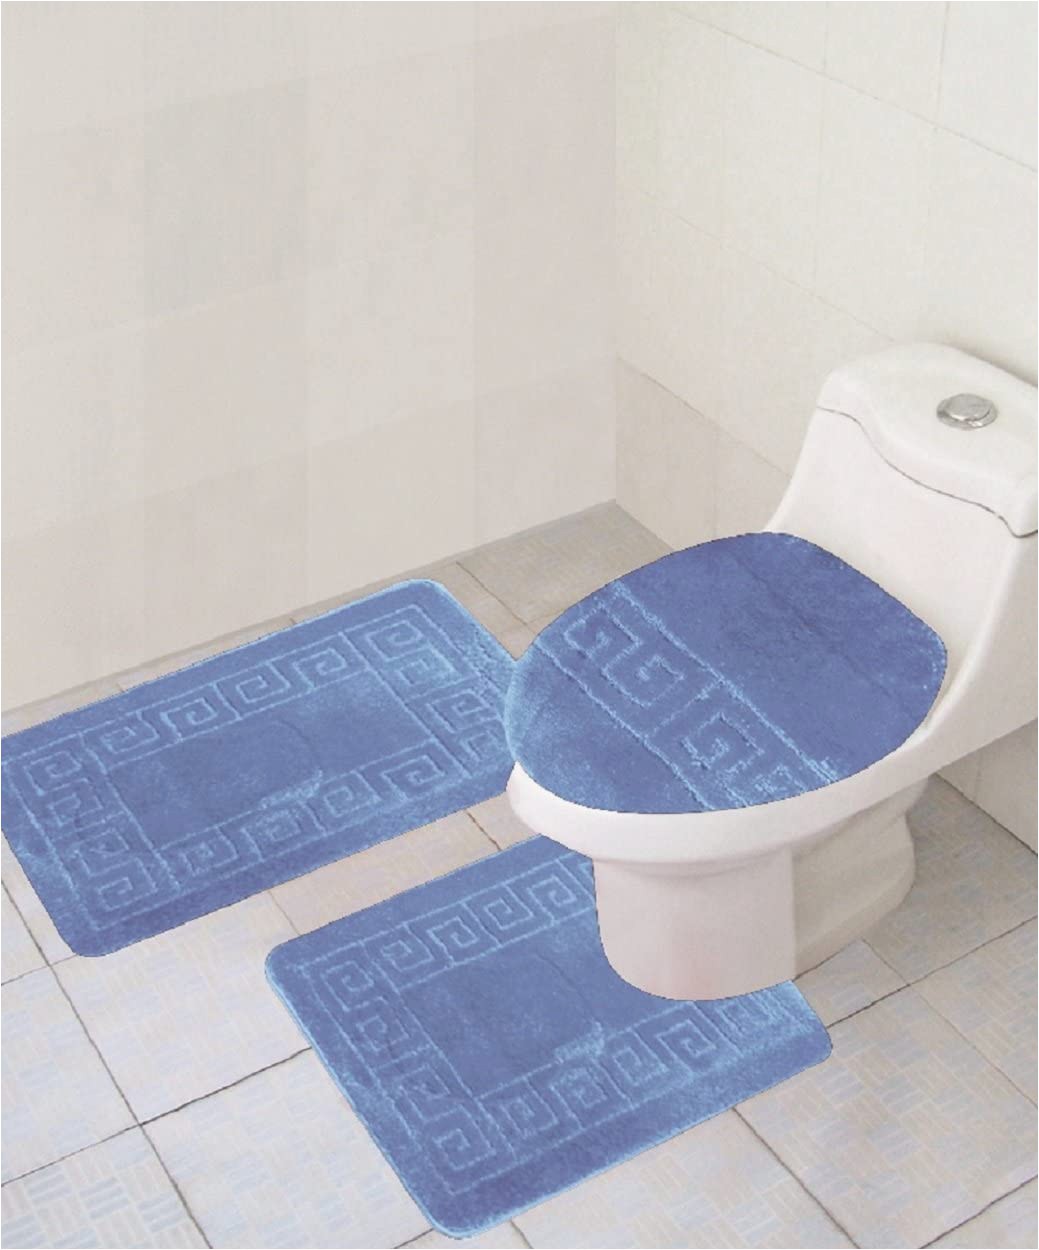 Bathroom Rugs and toilet Lid Covers 3 Piece Bath Rug Set Pattern Bathroom Rug 20"x32" Contour Mat 20"x20" with Lid Cover Sky Blue